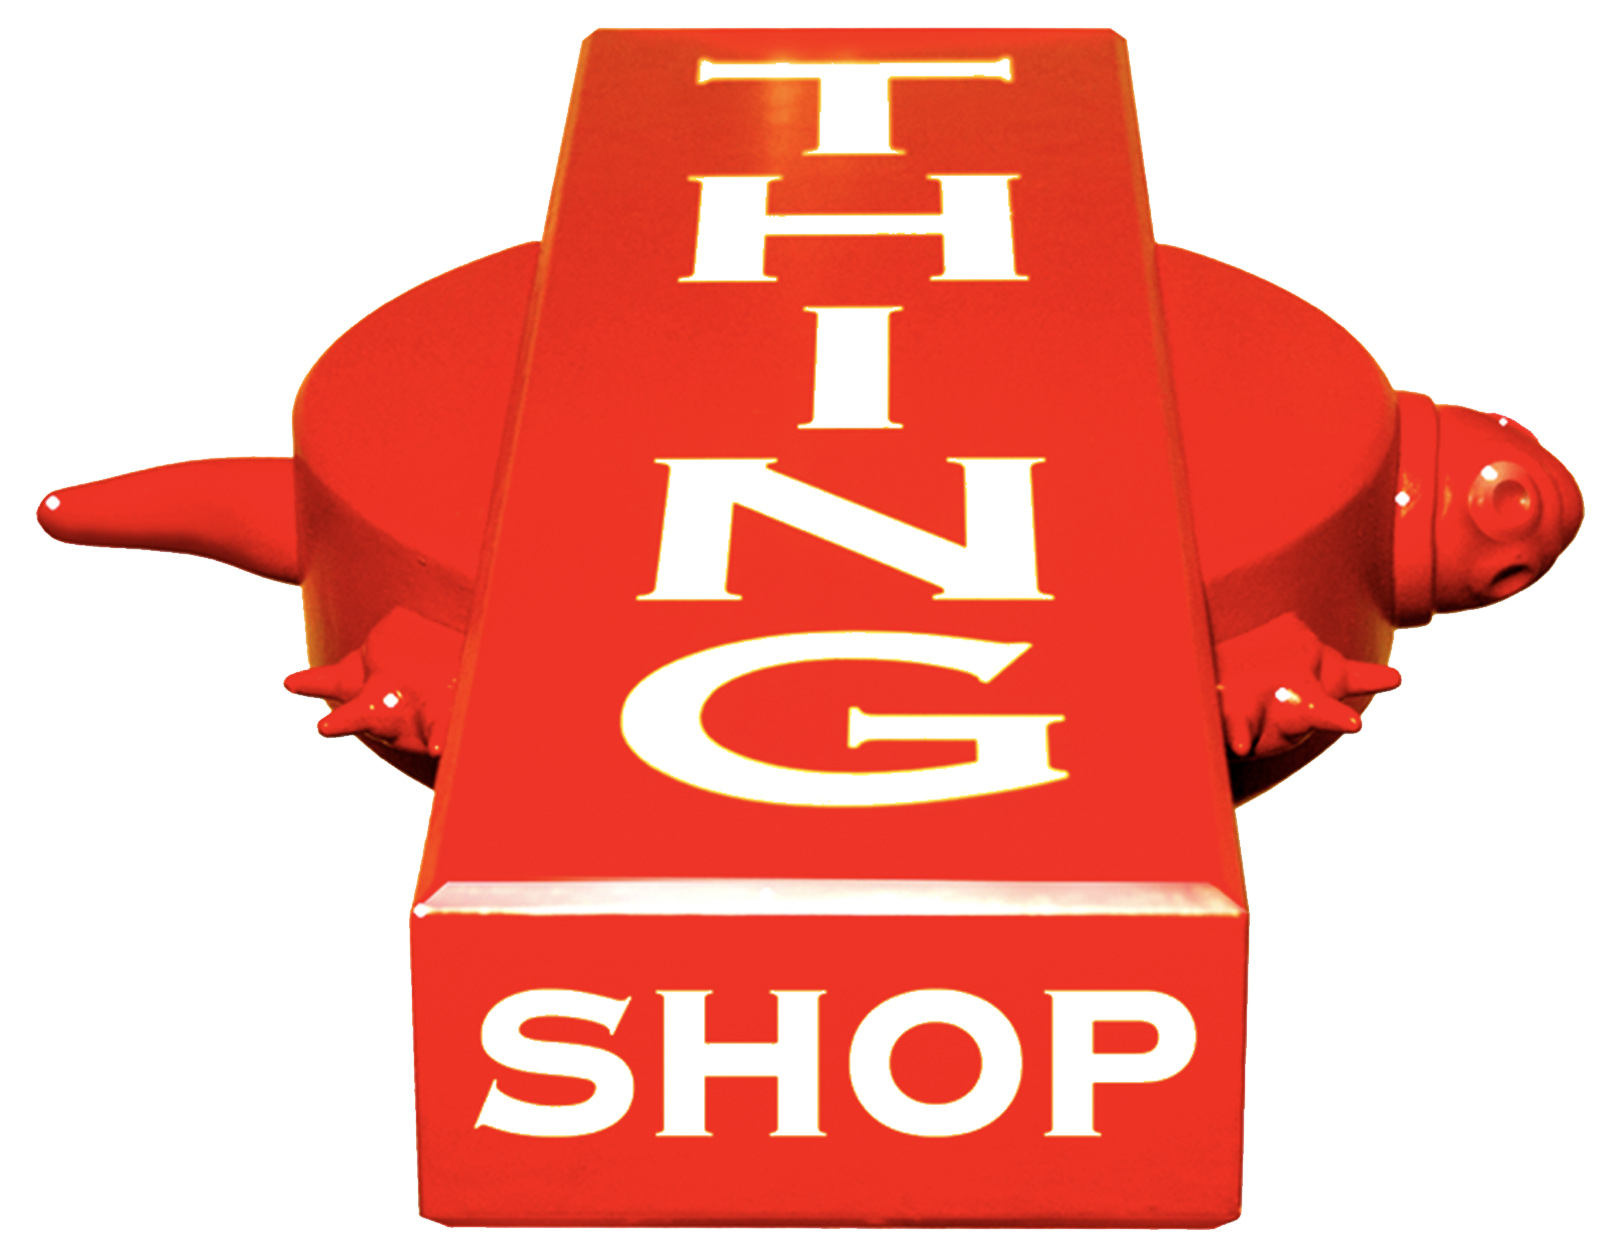 The Thing Shop